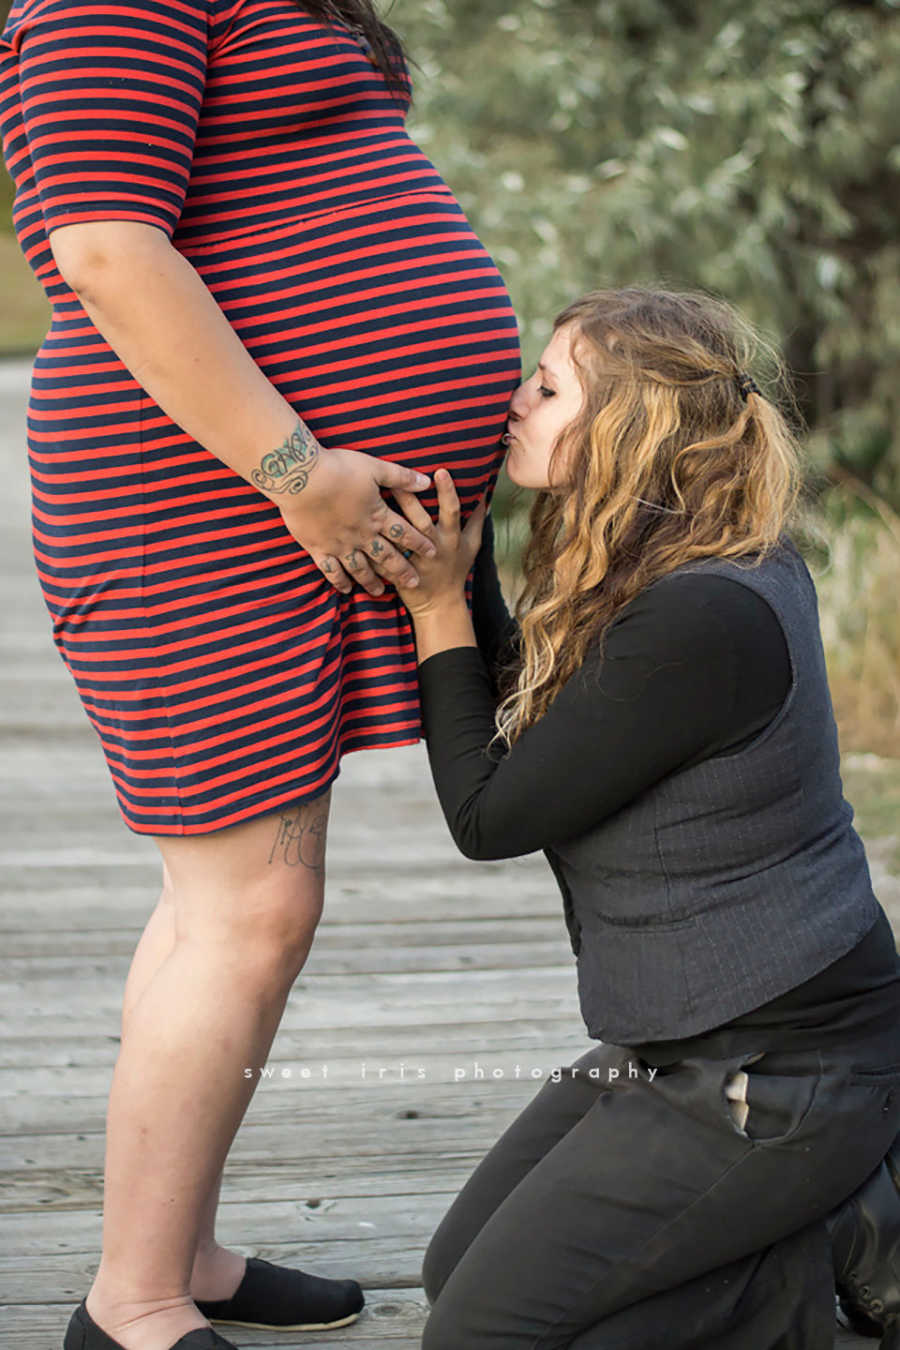 Pregnant woman stands while wife sits in front of her kissing her stomach